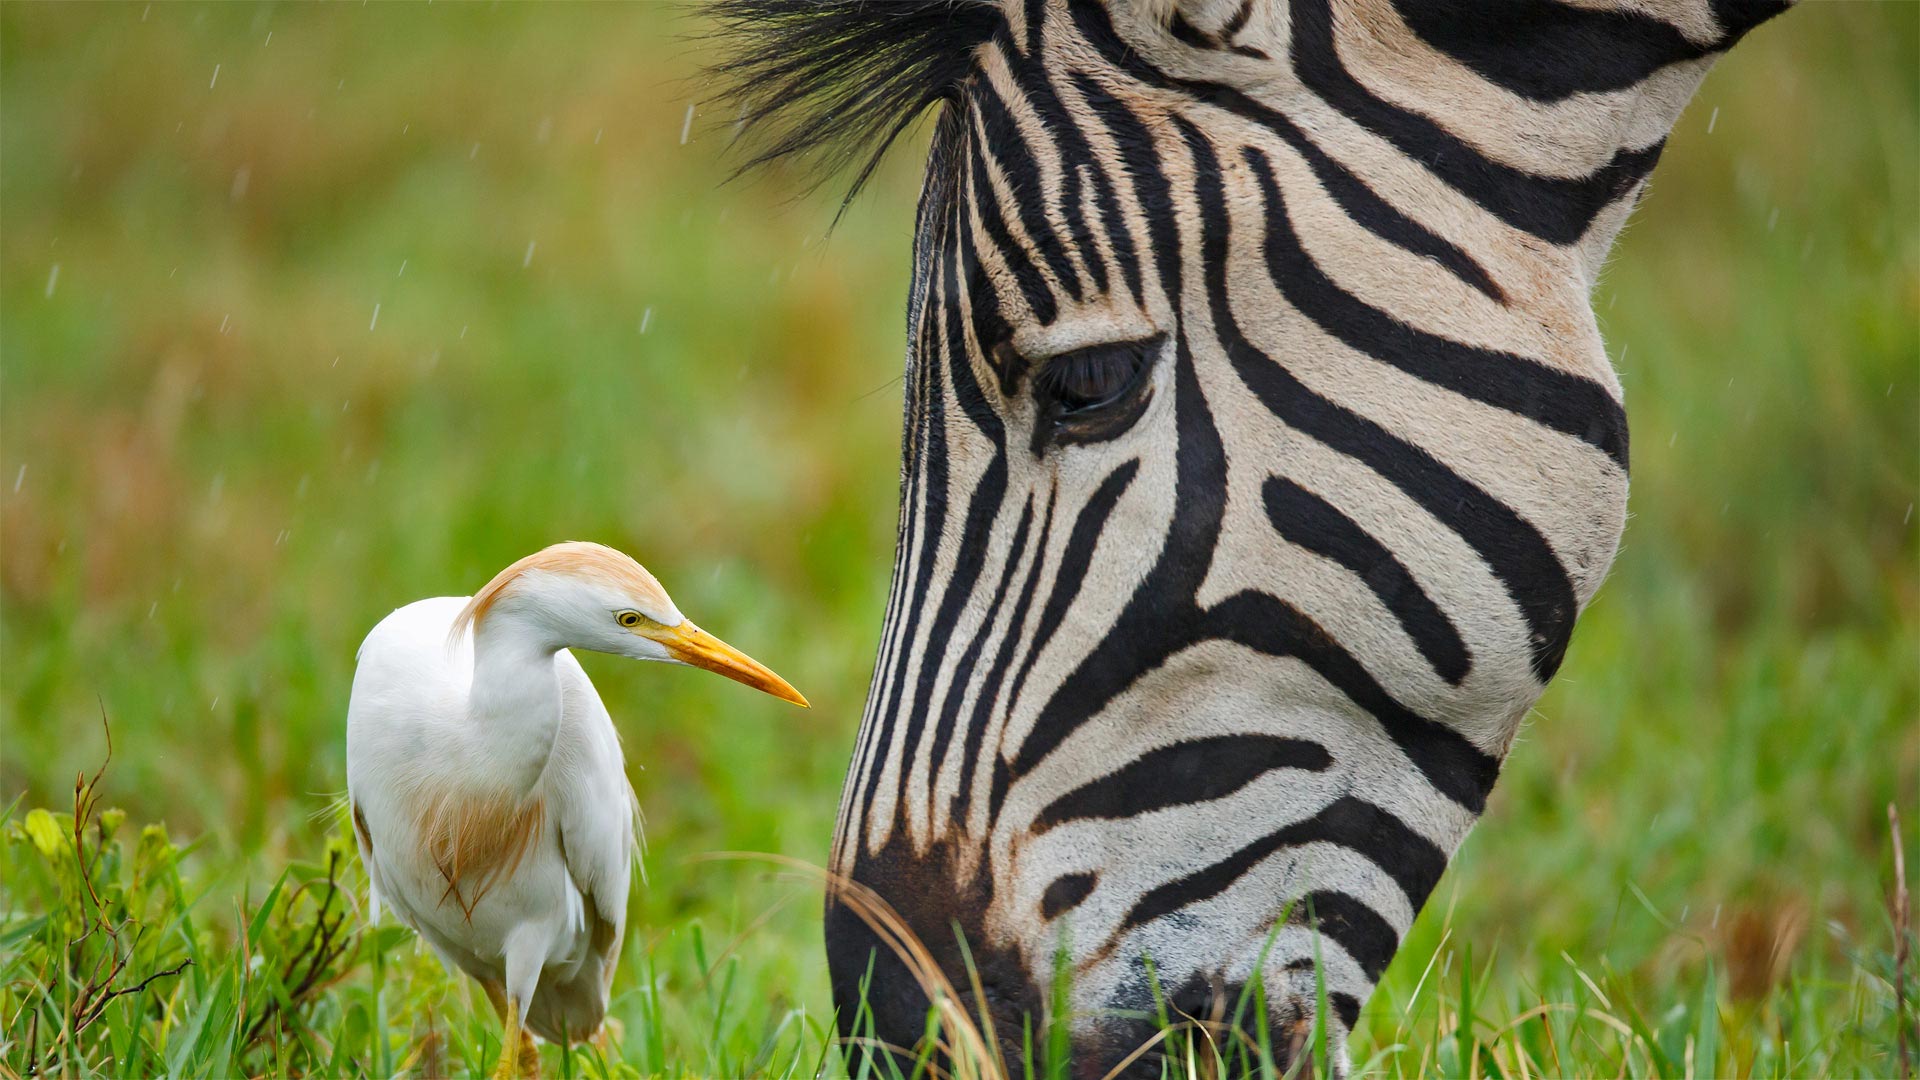 A Burchell's zebra and a cattle egret at the Rietvlei Nature Reserve in South Africa - Richard Du Toit